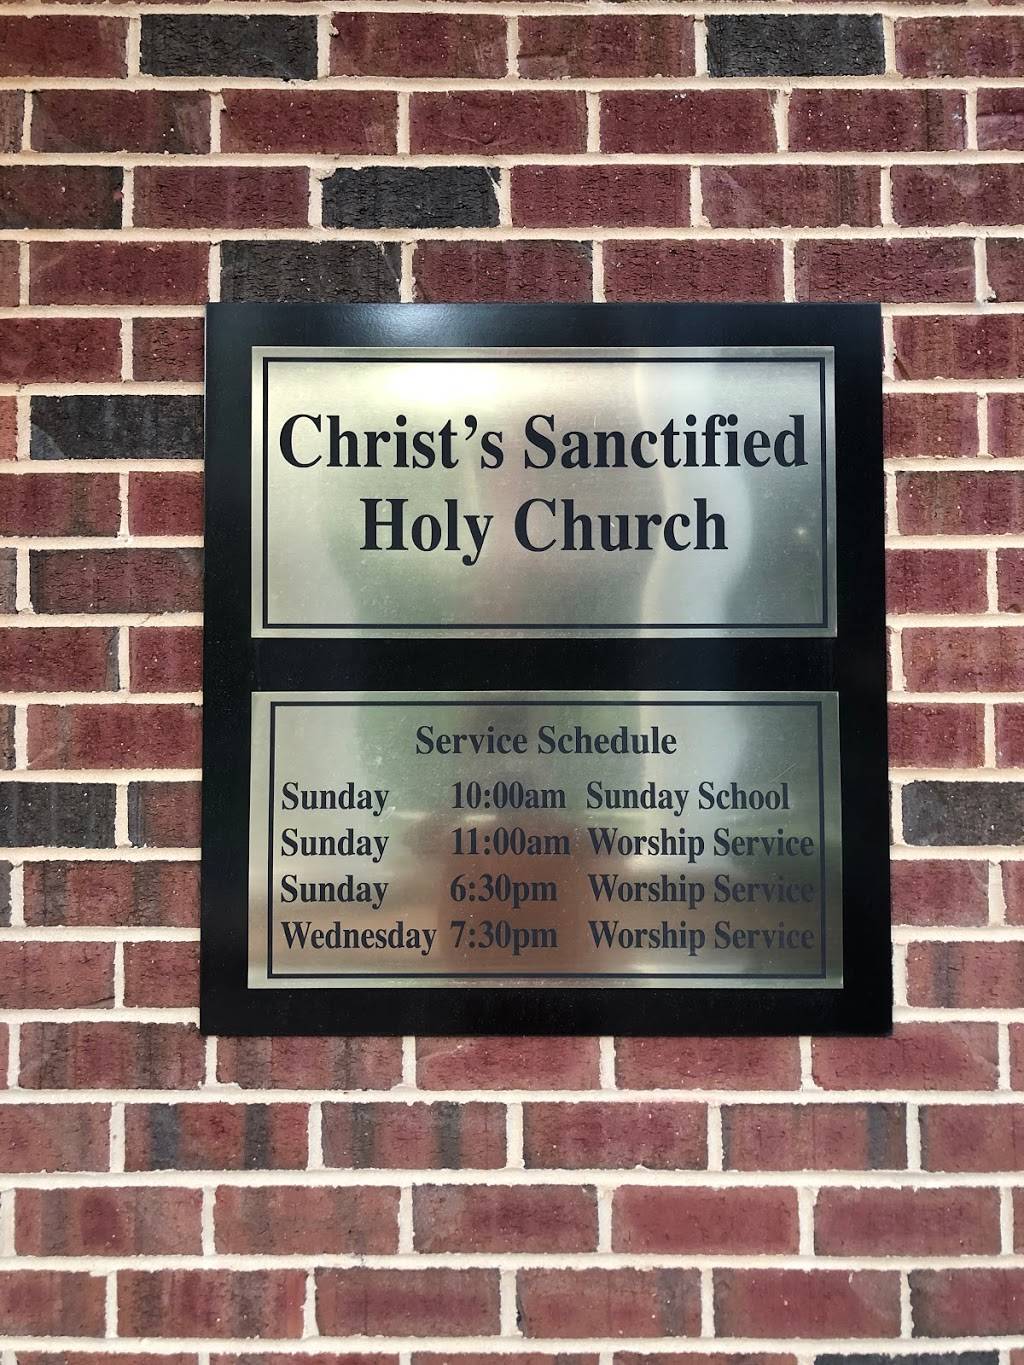 Christs Sanctified Holy Church | 9050 Strickland Rd, Raleigh, NC 27615 | Phone: (919) 846-1833